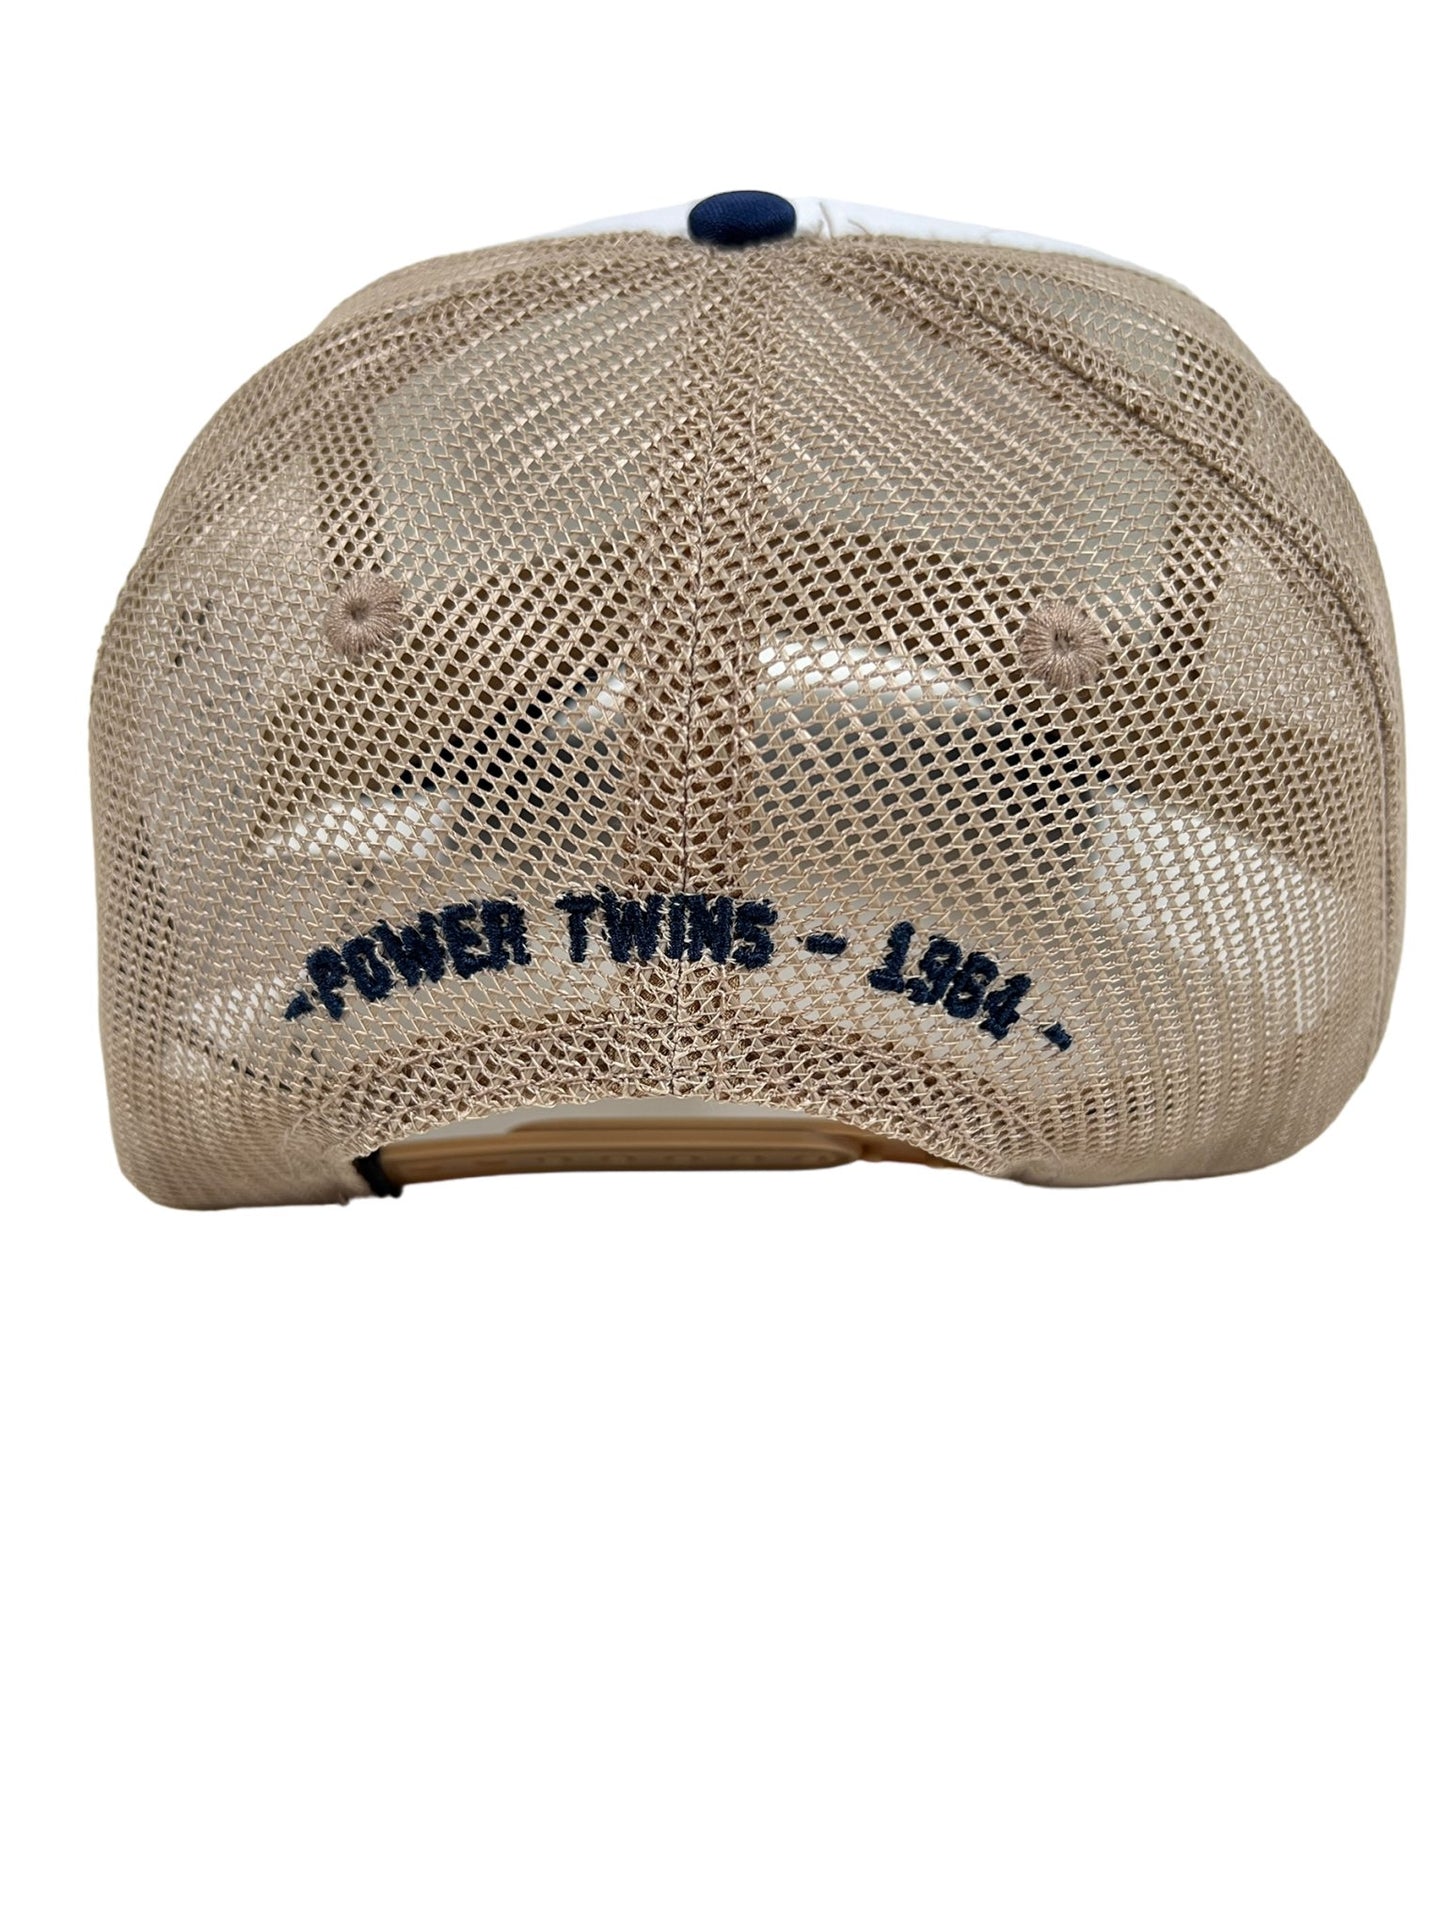 A DSquared2 BCM0762 baseball cap with the word power twin on it and the brand's iconic maple logo.